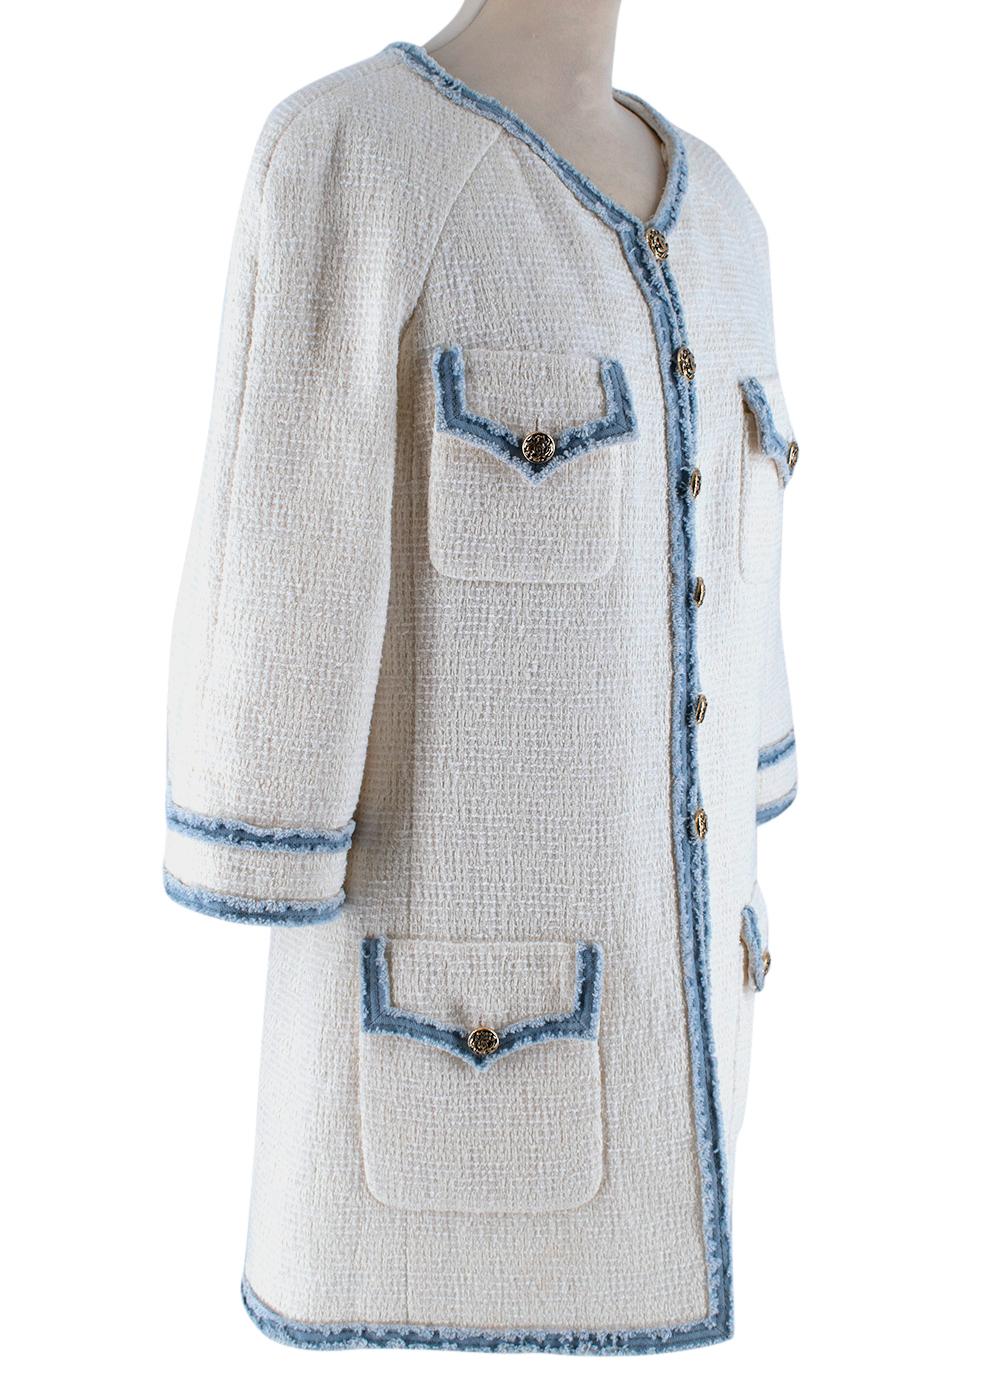 Chanel White Cotton Blend Tweed Denim Trimmed Long Line Jacket 

-Signature tweed fabric
-Gorgeous denim frayed trims 
-Iconic CC logo branded golden buttons 
-Luxurious silk lining, depicting Camellias, Chanels favorite flower 
-Round neckline